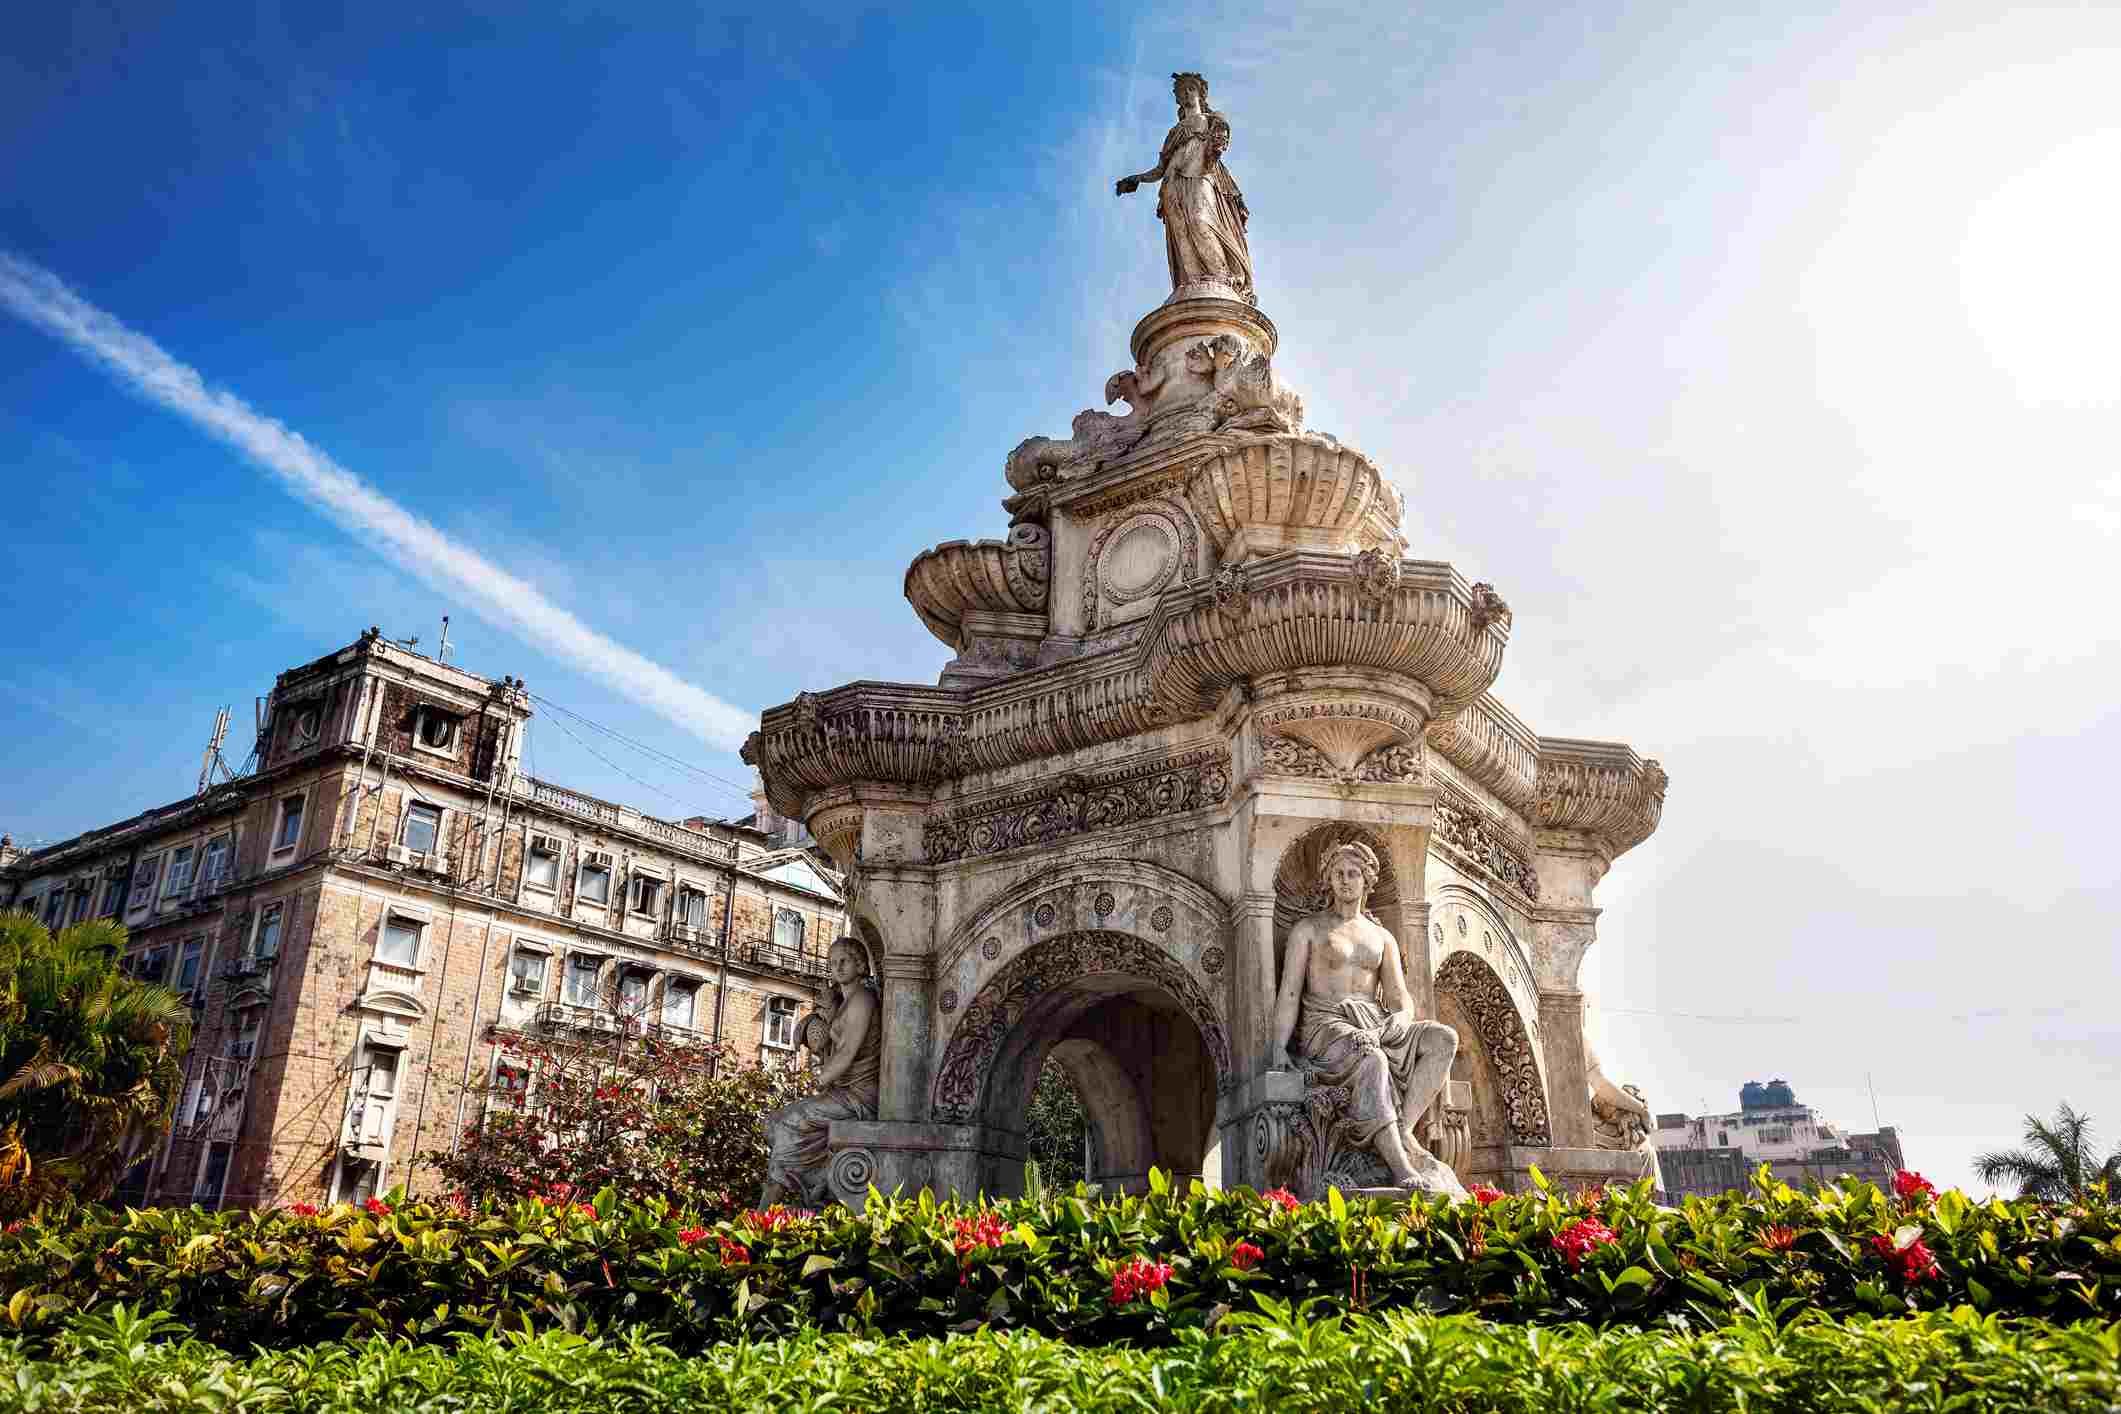 Flora Fountain in Mumbai, a must visit Victorian style structure